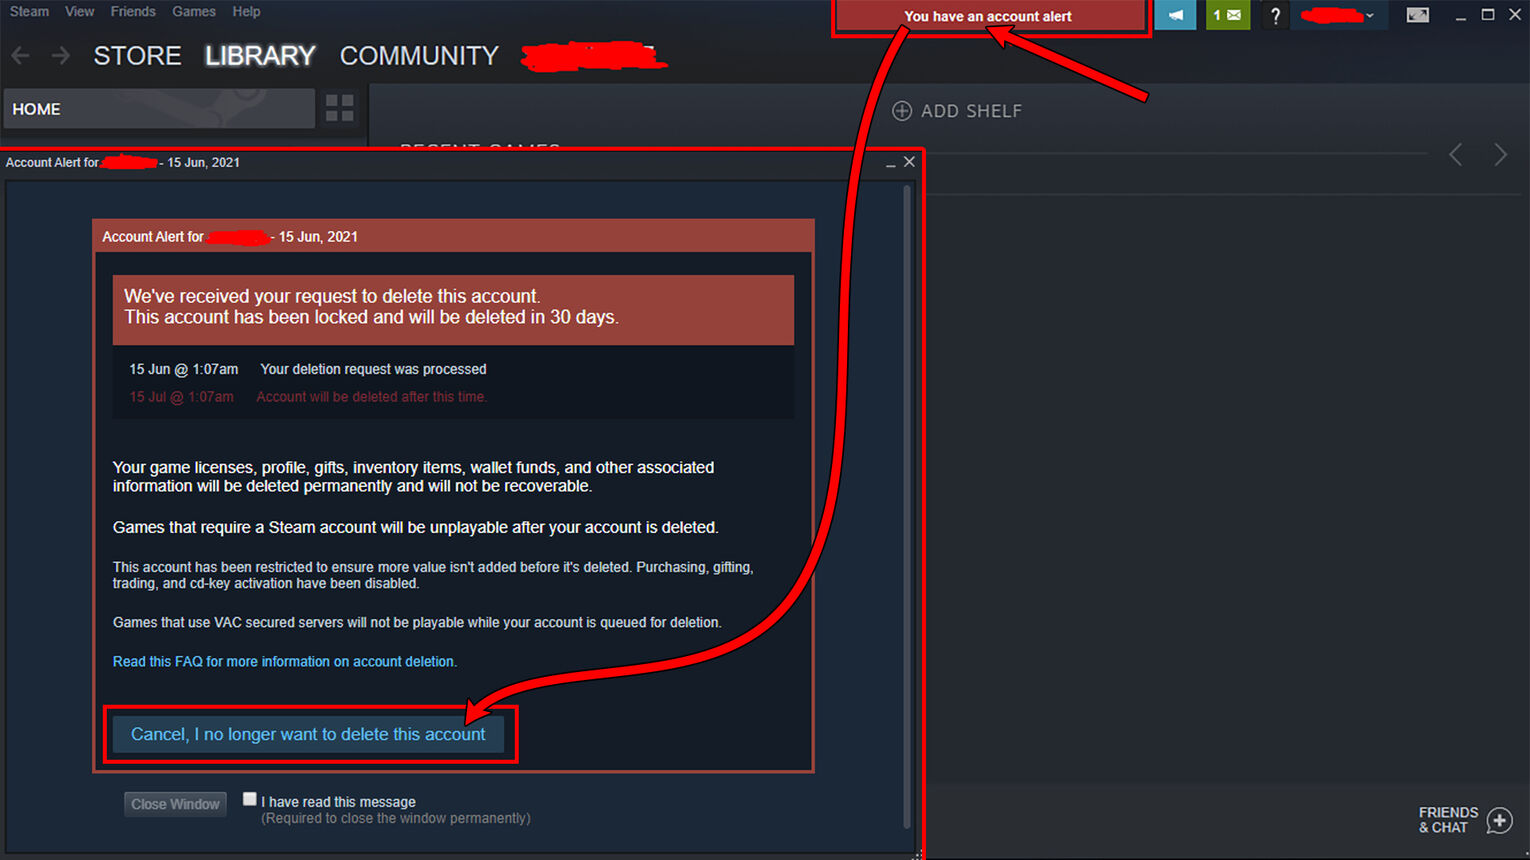 Steam How to Cancel Account Deletion